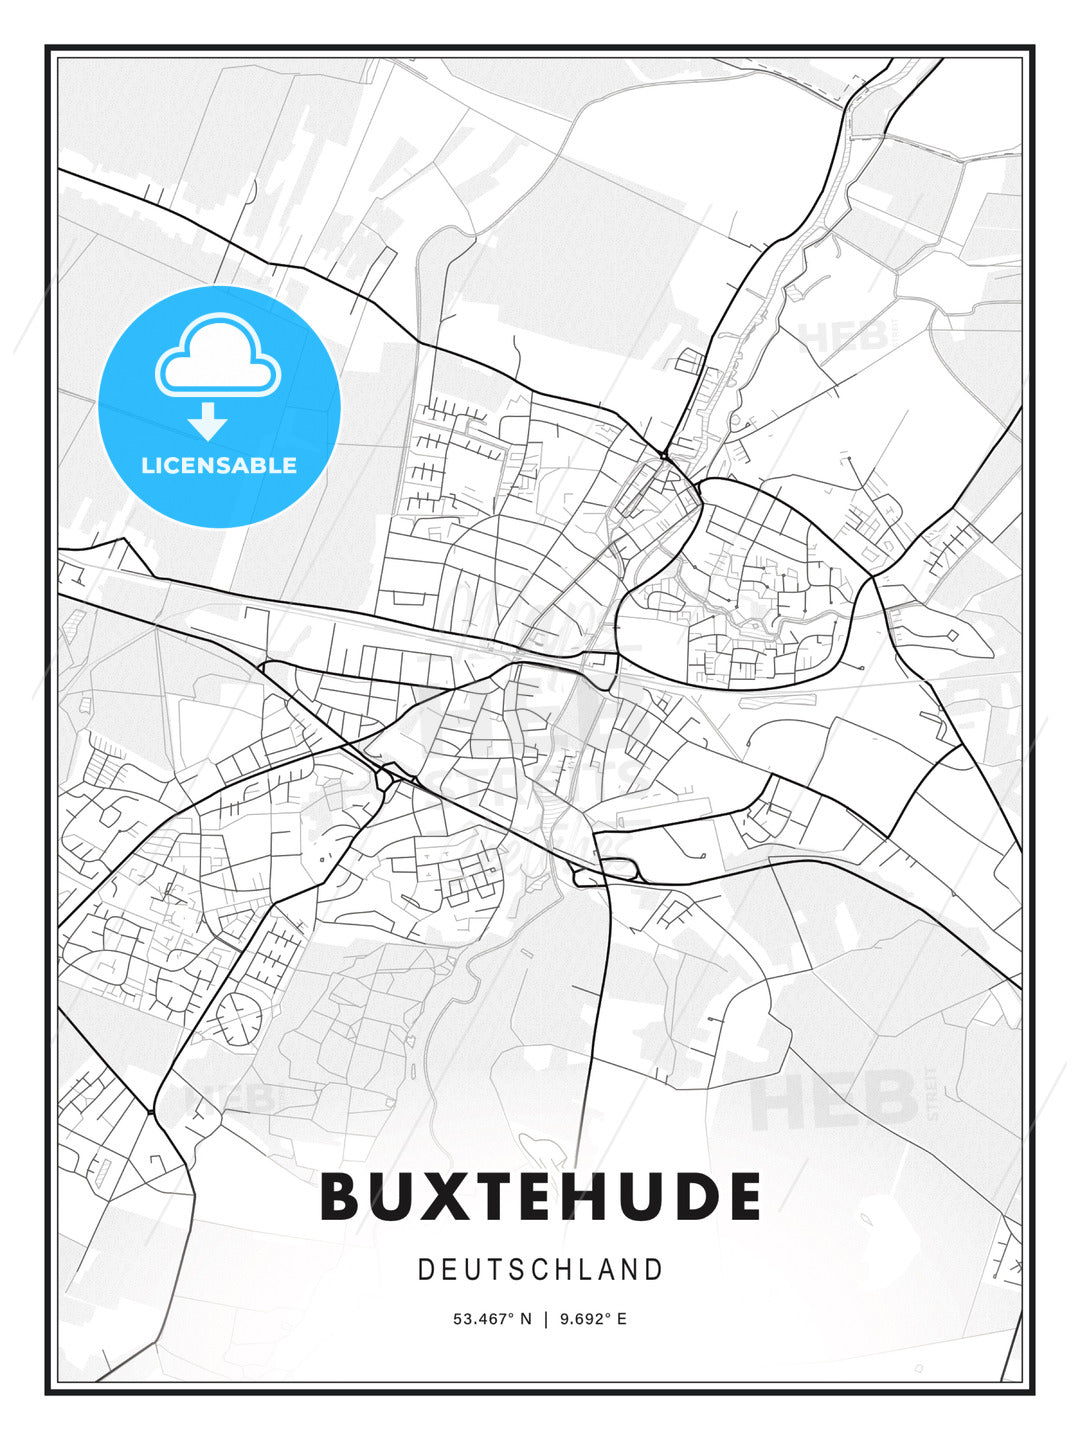 Buxtehude, Germany, Modern Print Template in Various Formats - HEBSTREITS Sketches